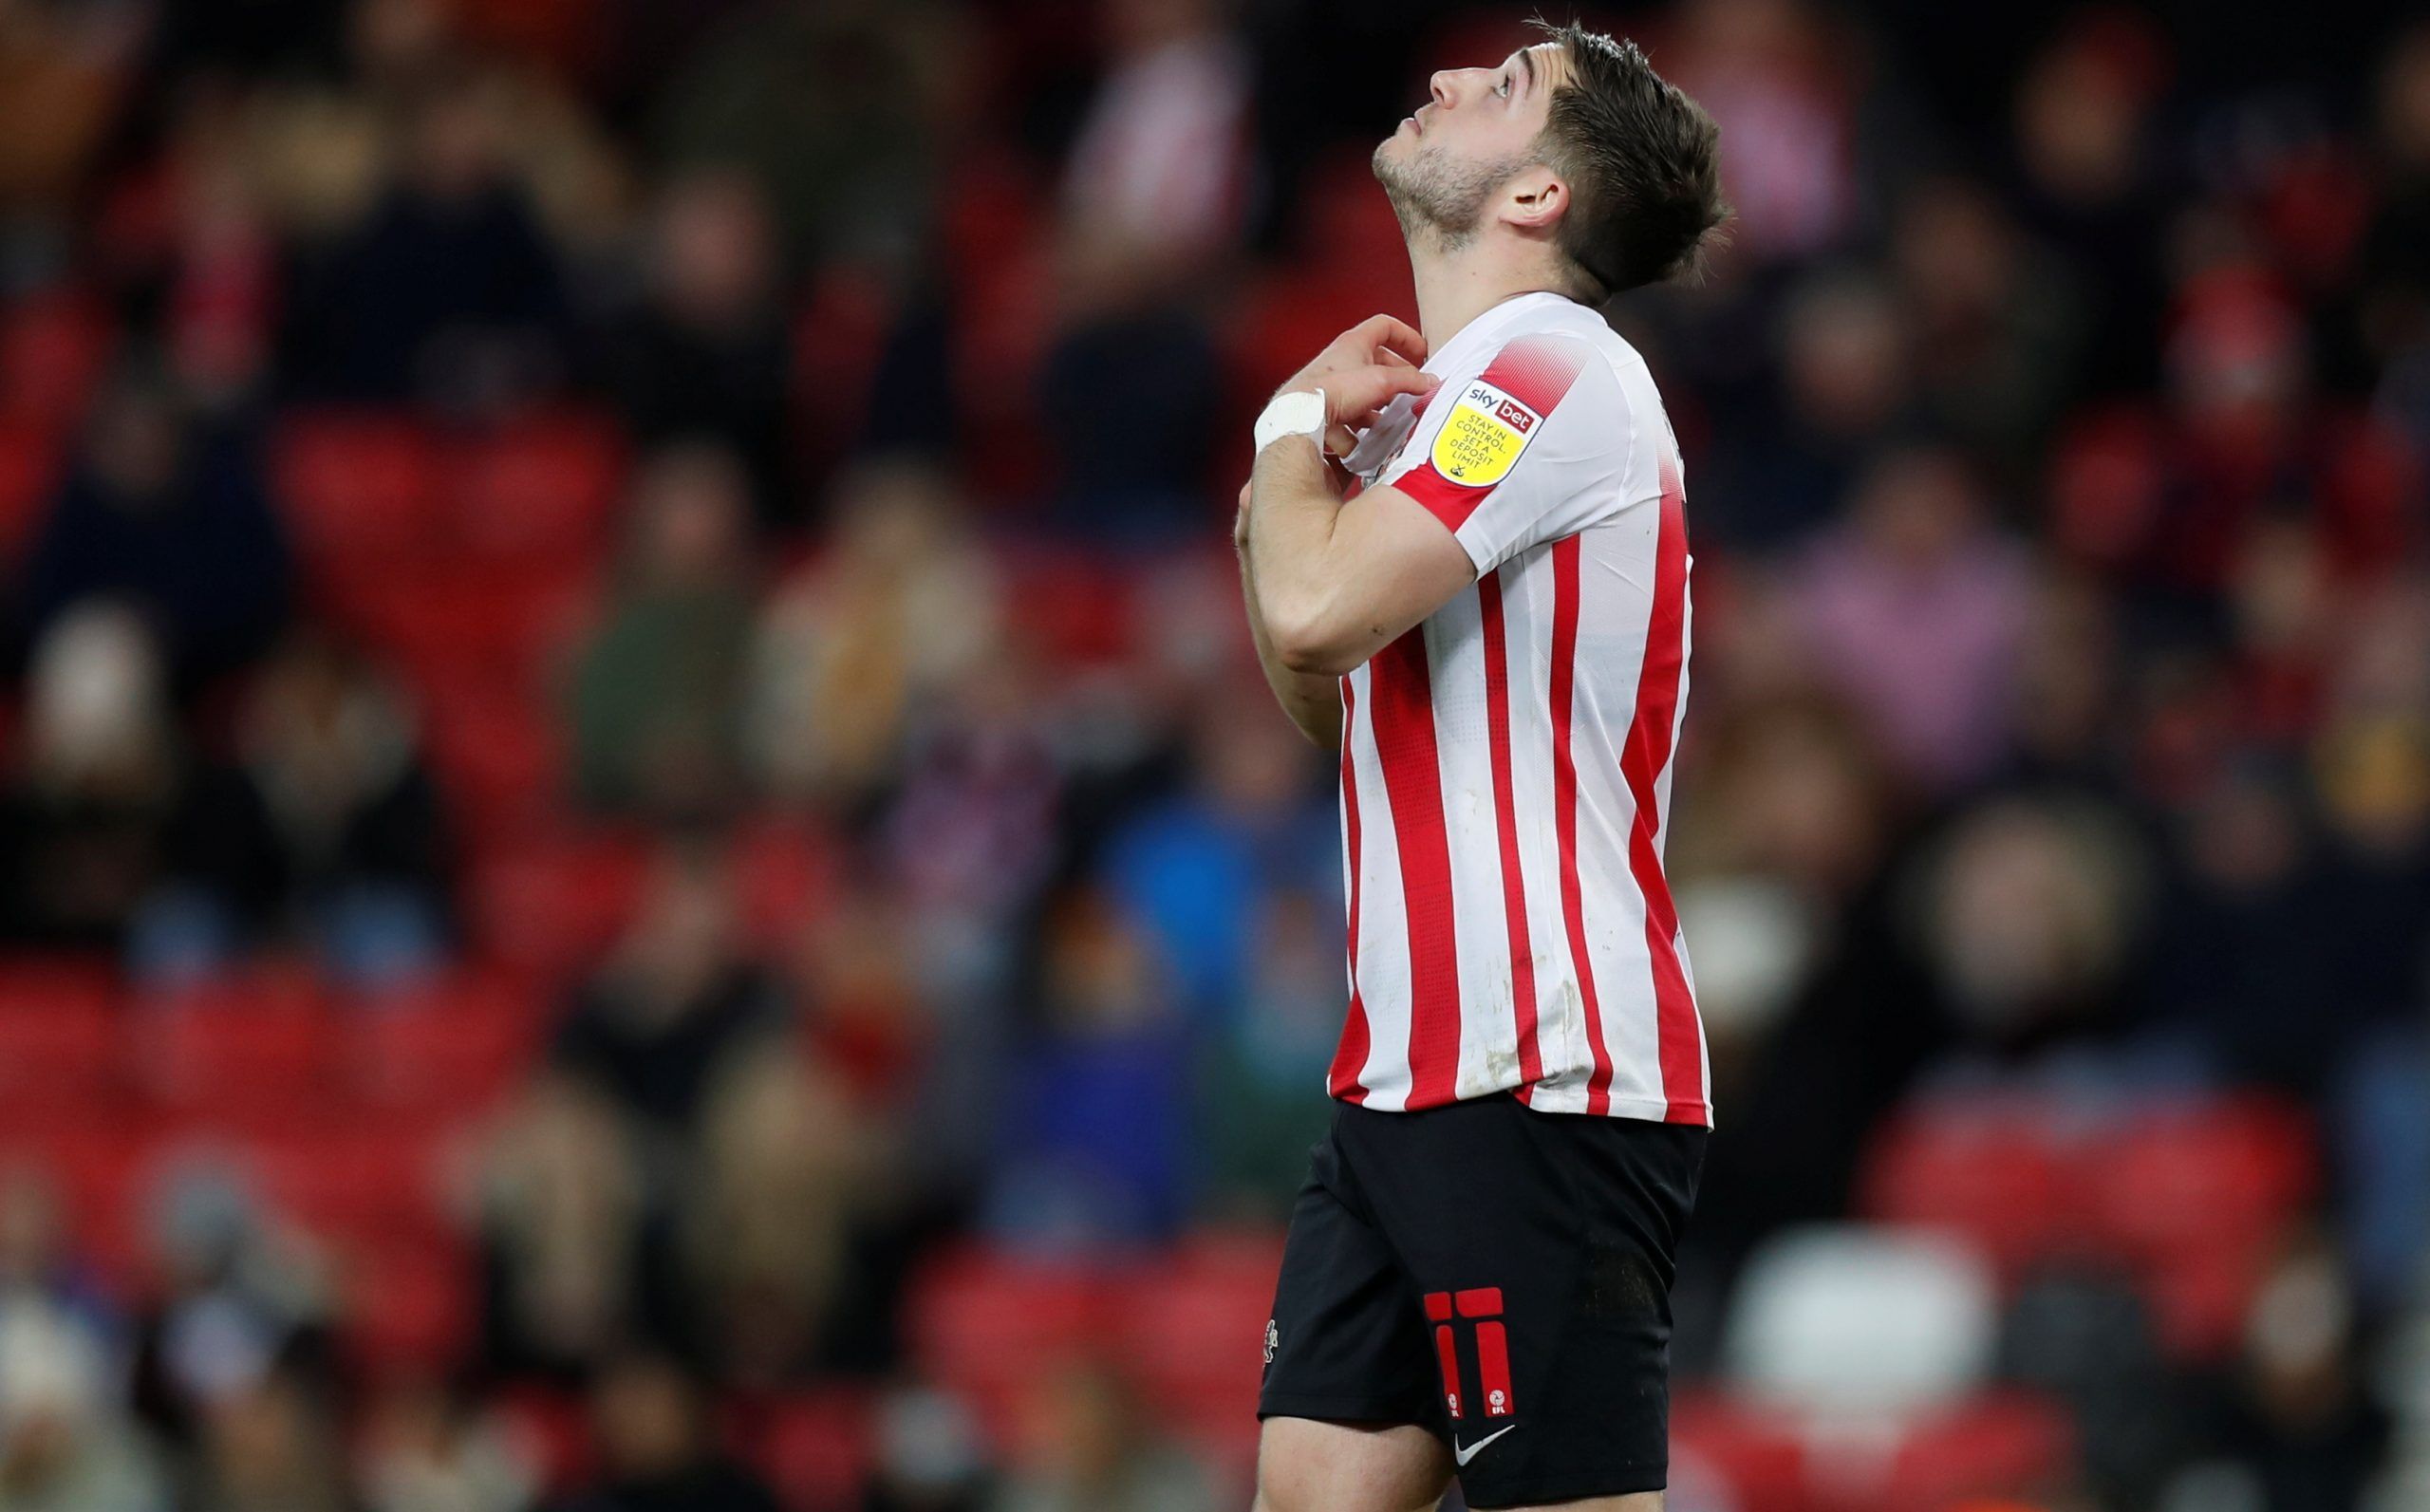 Soccer Football - EFL Trophy - Group Stage - Sunderland v Bradford City - Stadium of Light, Sunderland, Britain - November 9, 2021  Sunderland's Lynden Gooch reacts after missing penalty in shoot-out  Action Images/Lee Smith  EDITORIAL USE ONLY. No use with unauthorized audio, video, data, fixture lists, club/league logos or 